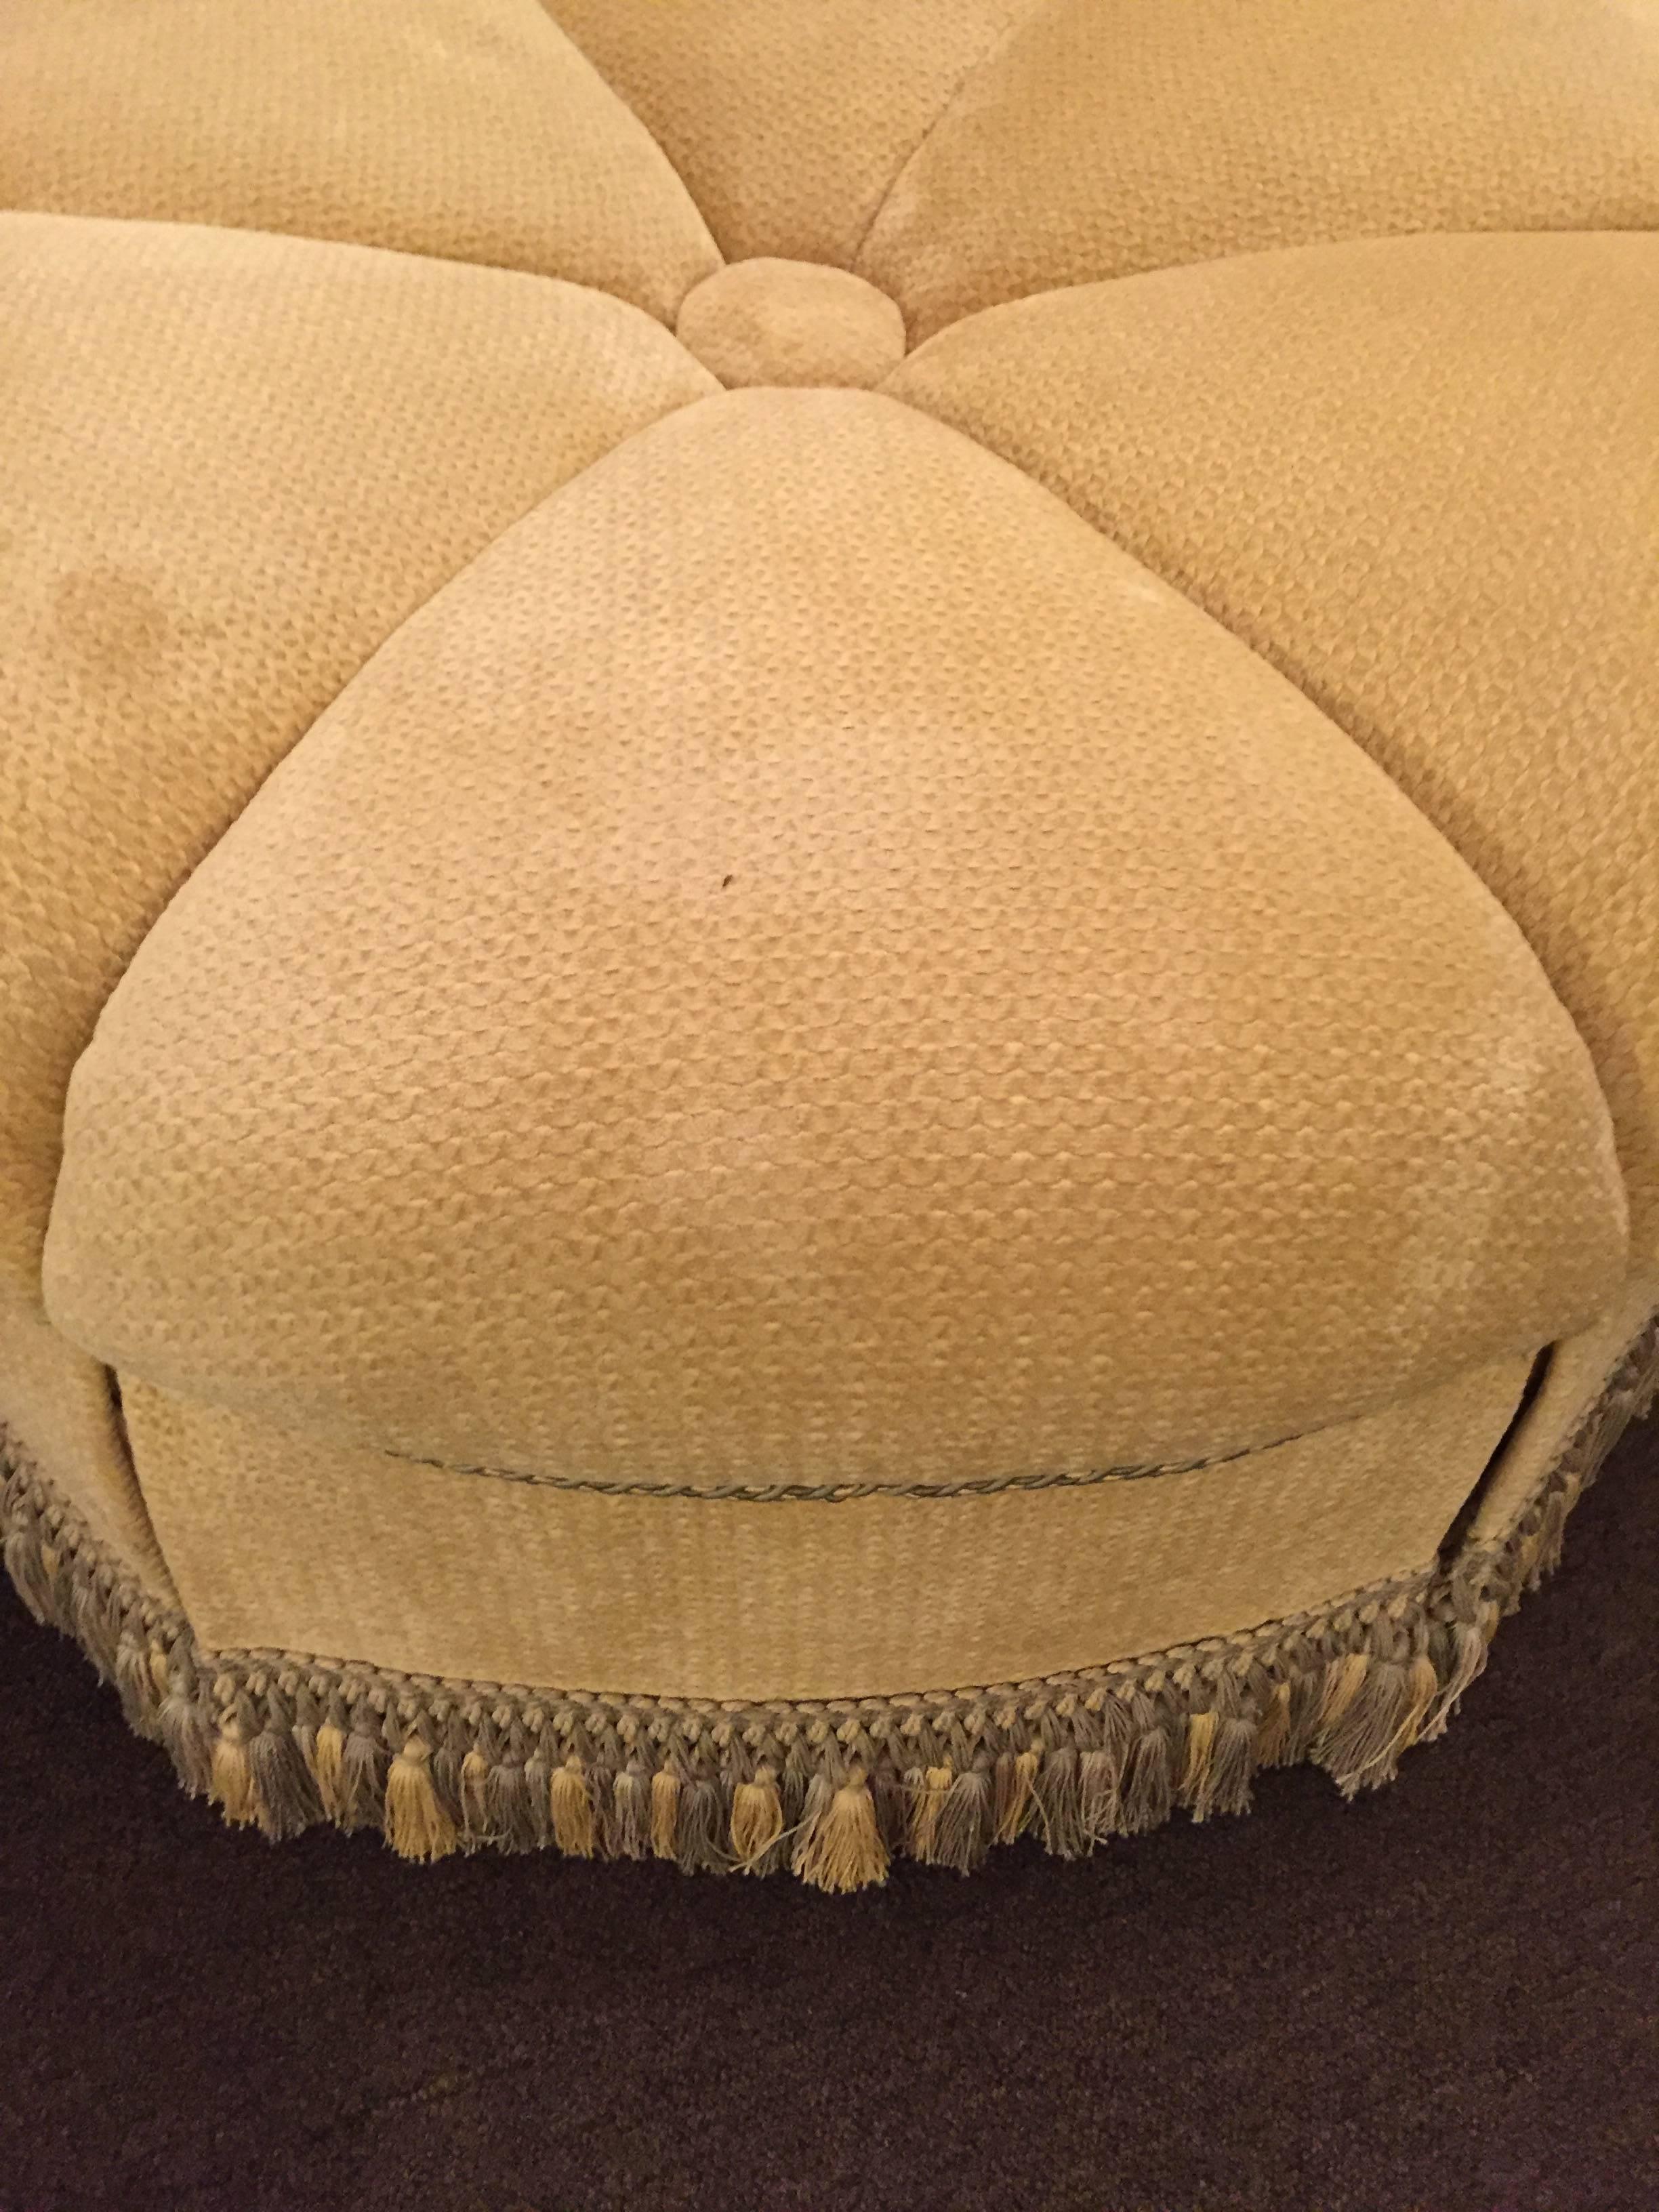 20th Century Circular Finely Upholstered and Lined Ottoman or Poof with a Tassel Fringe Base